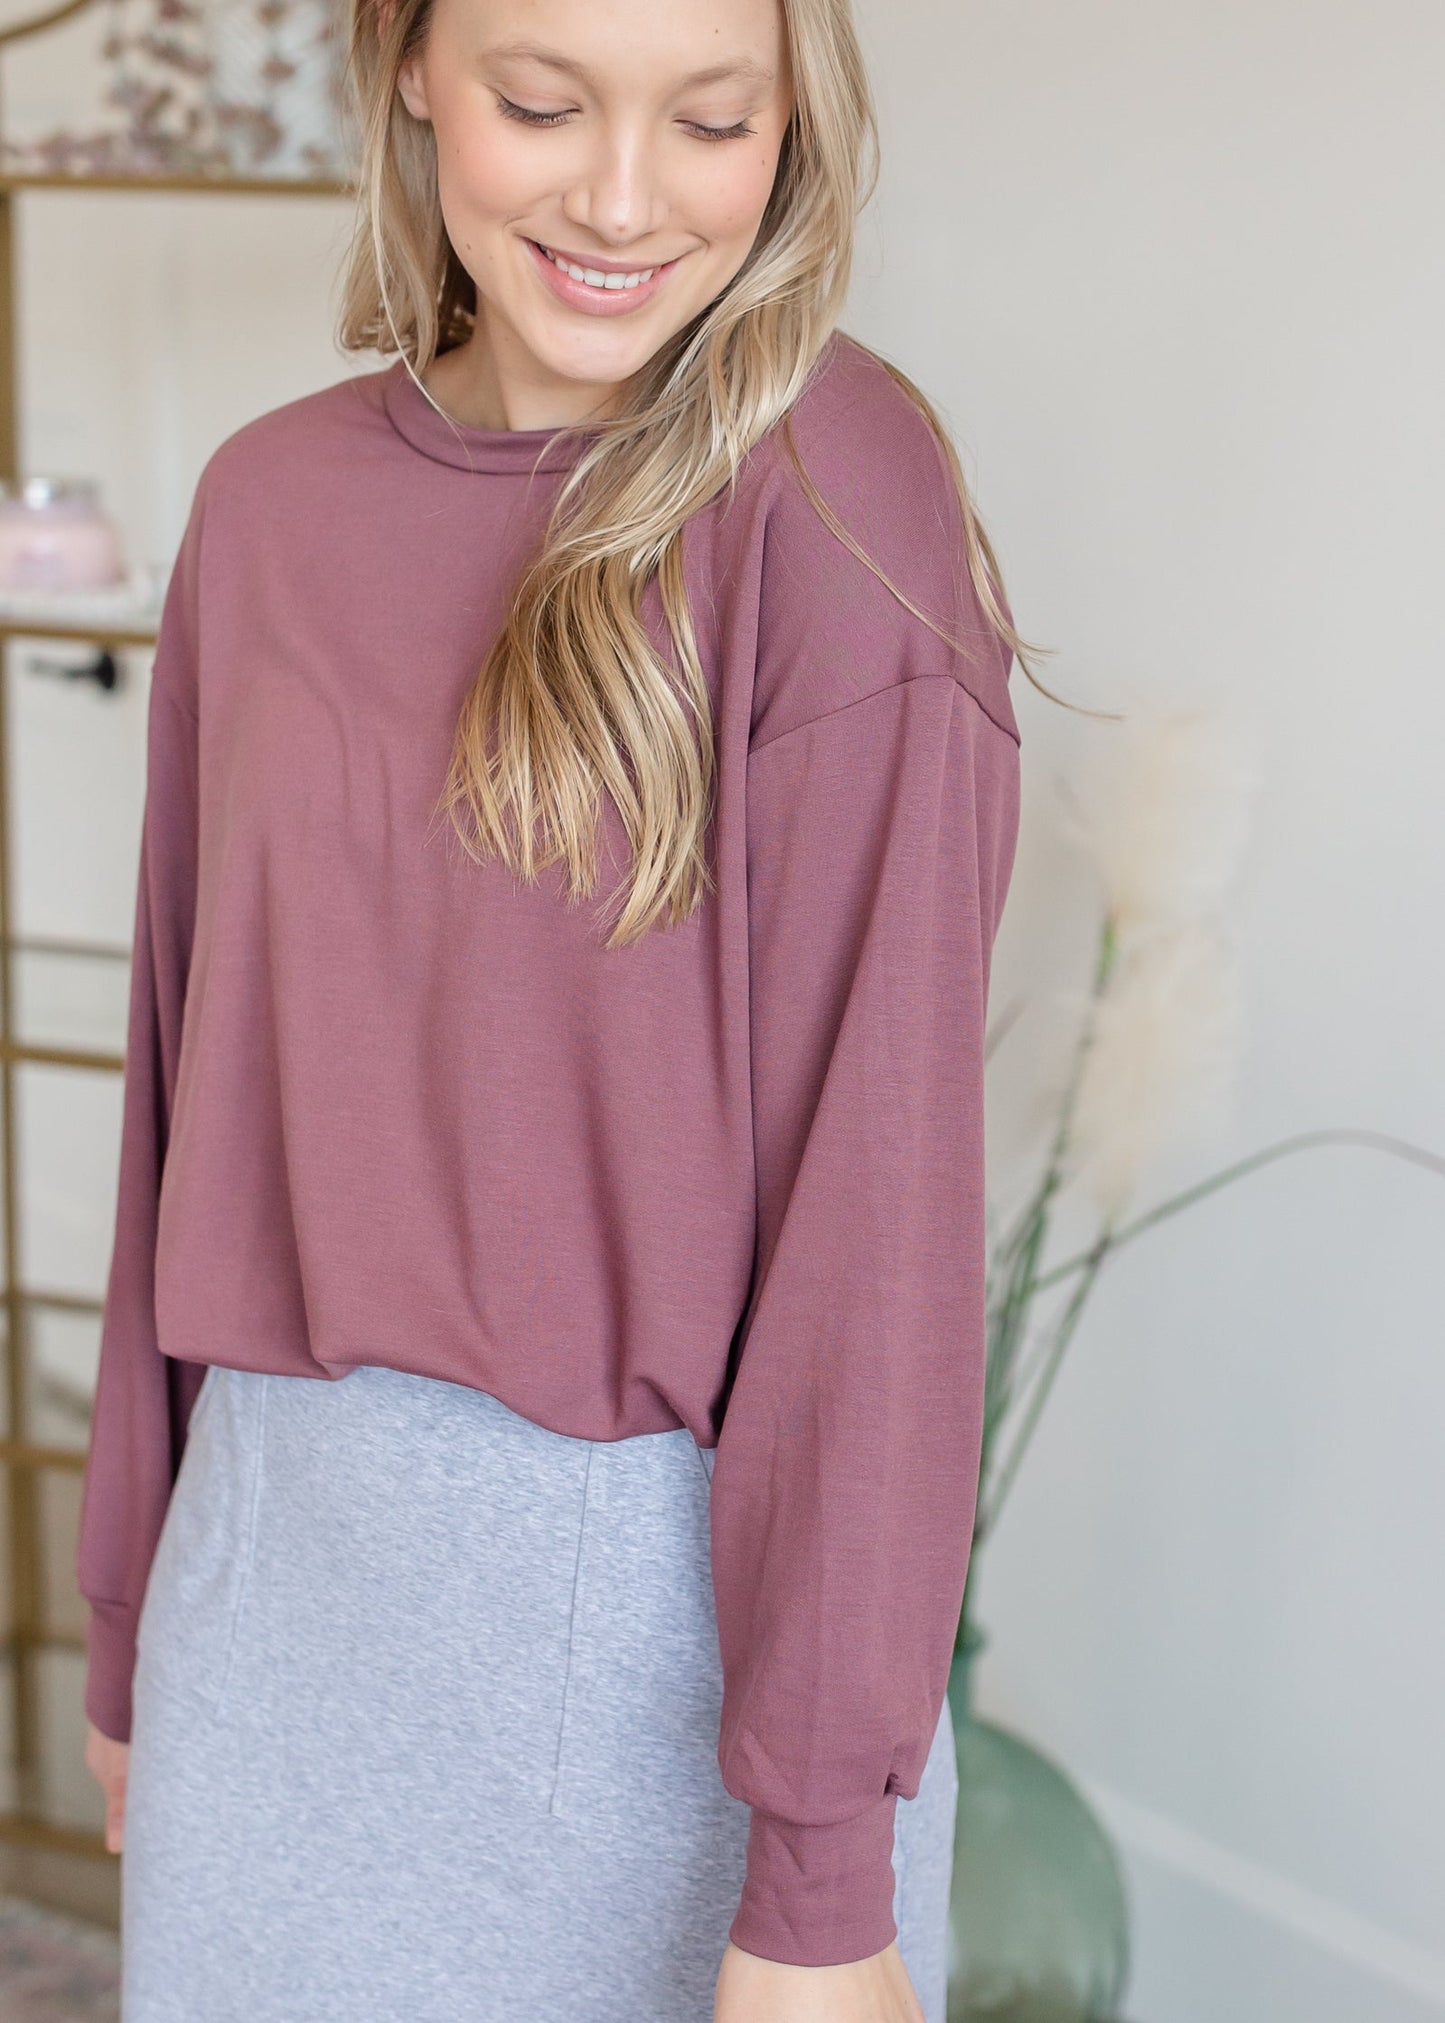 French Terry Pullover Top Tops Space 46